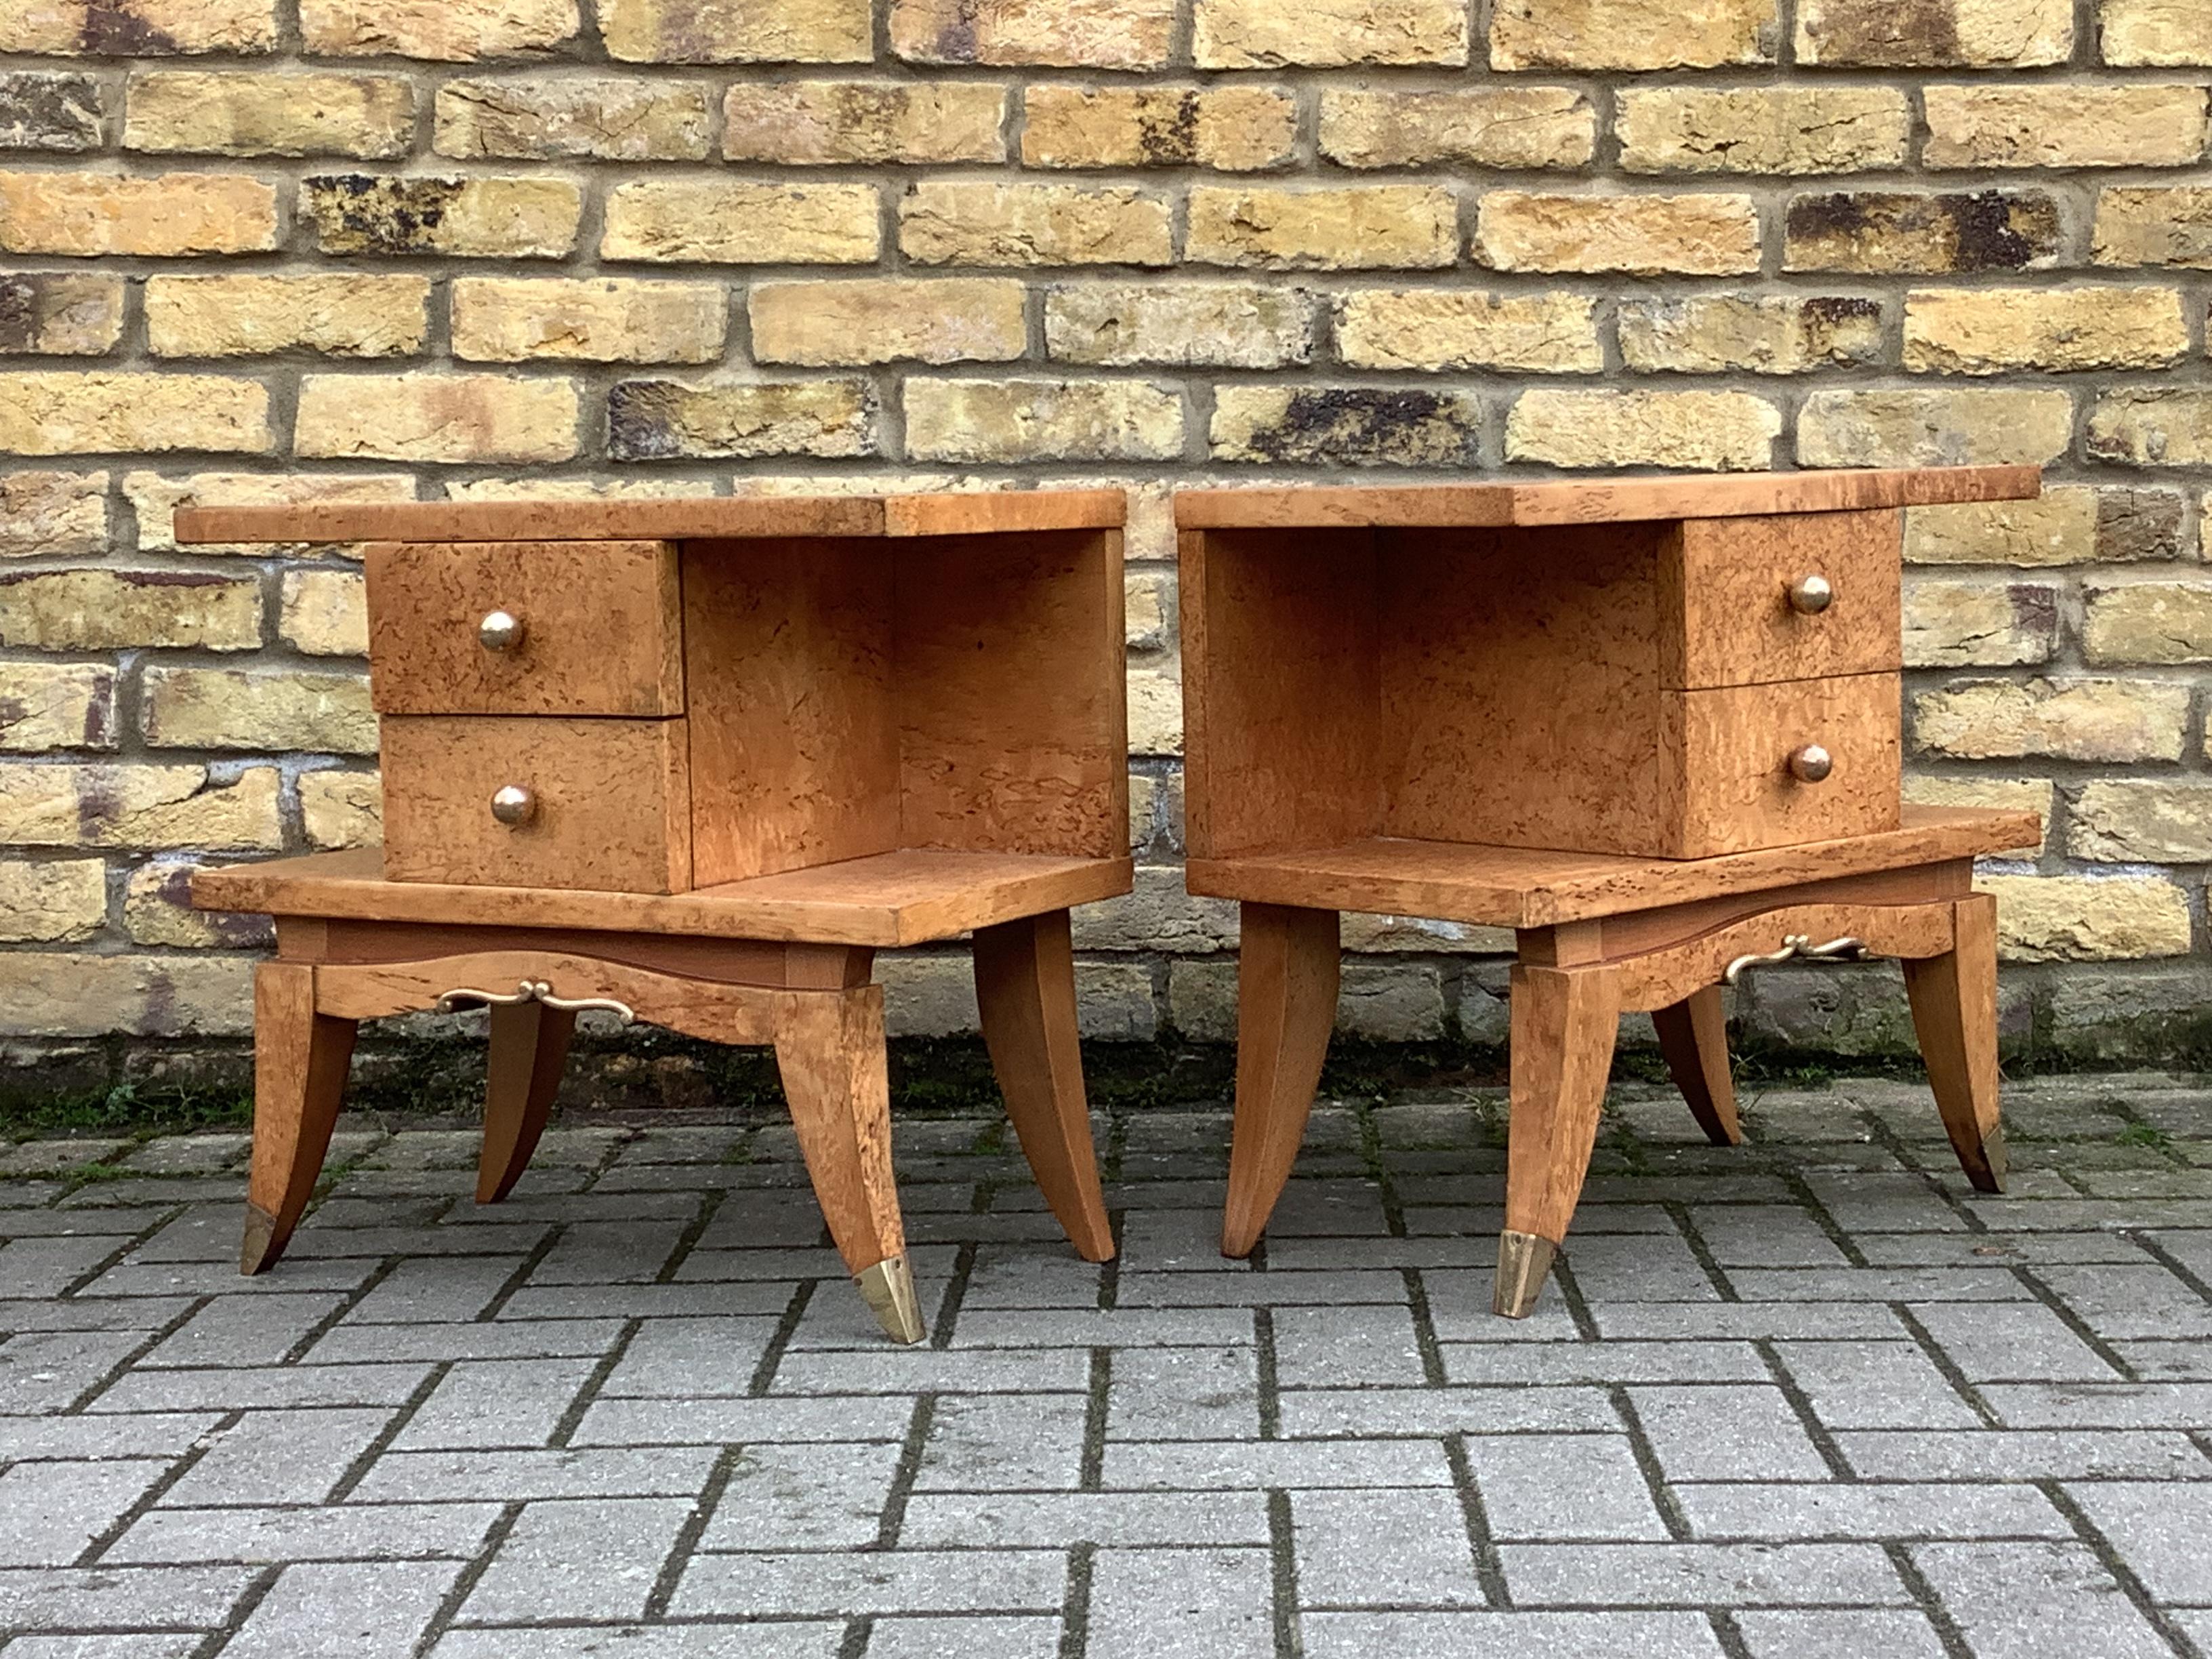 Beautiful pair of French Deco bedside cabinets restored and polished to bring out the stunning grain .Two storage draws
With wonderfully shaped legs with brass tips.